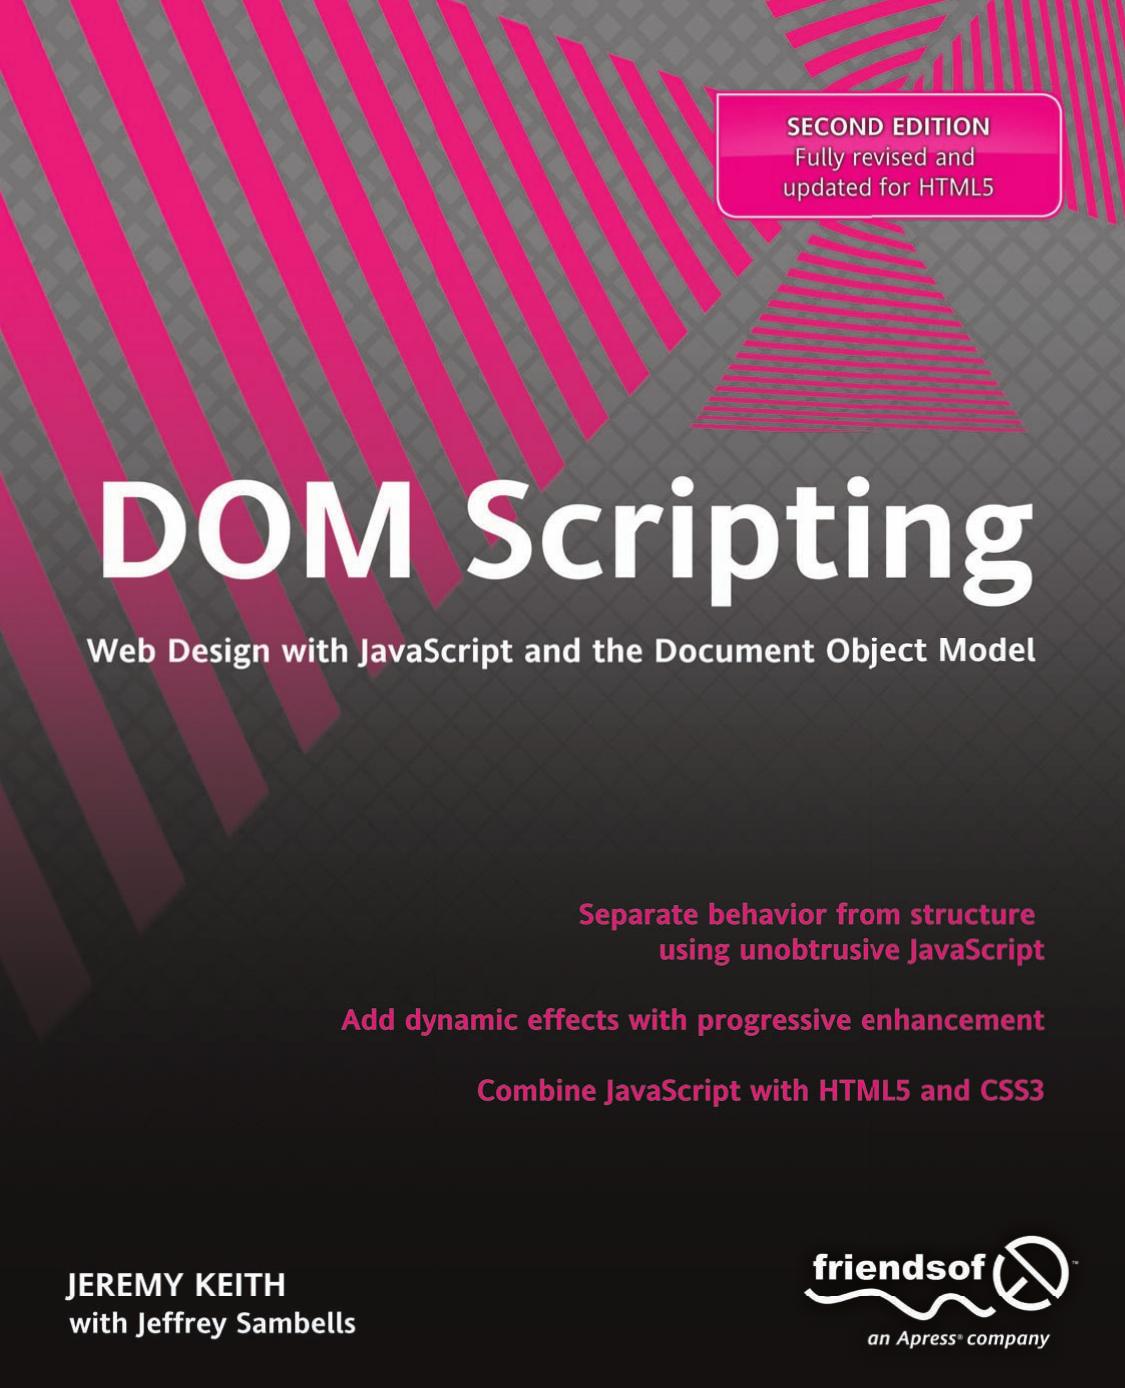 DOM Scripting: Web Design With JavaScript and the Document Object Model